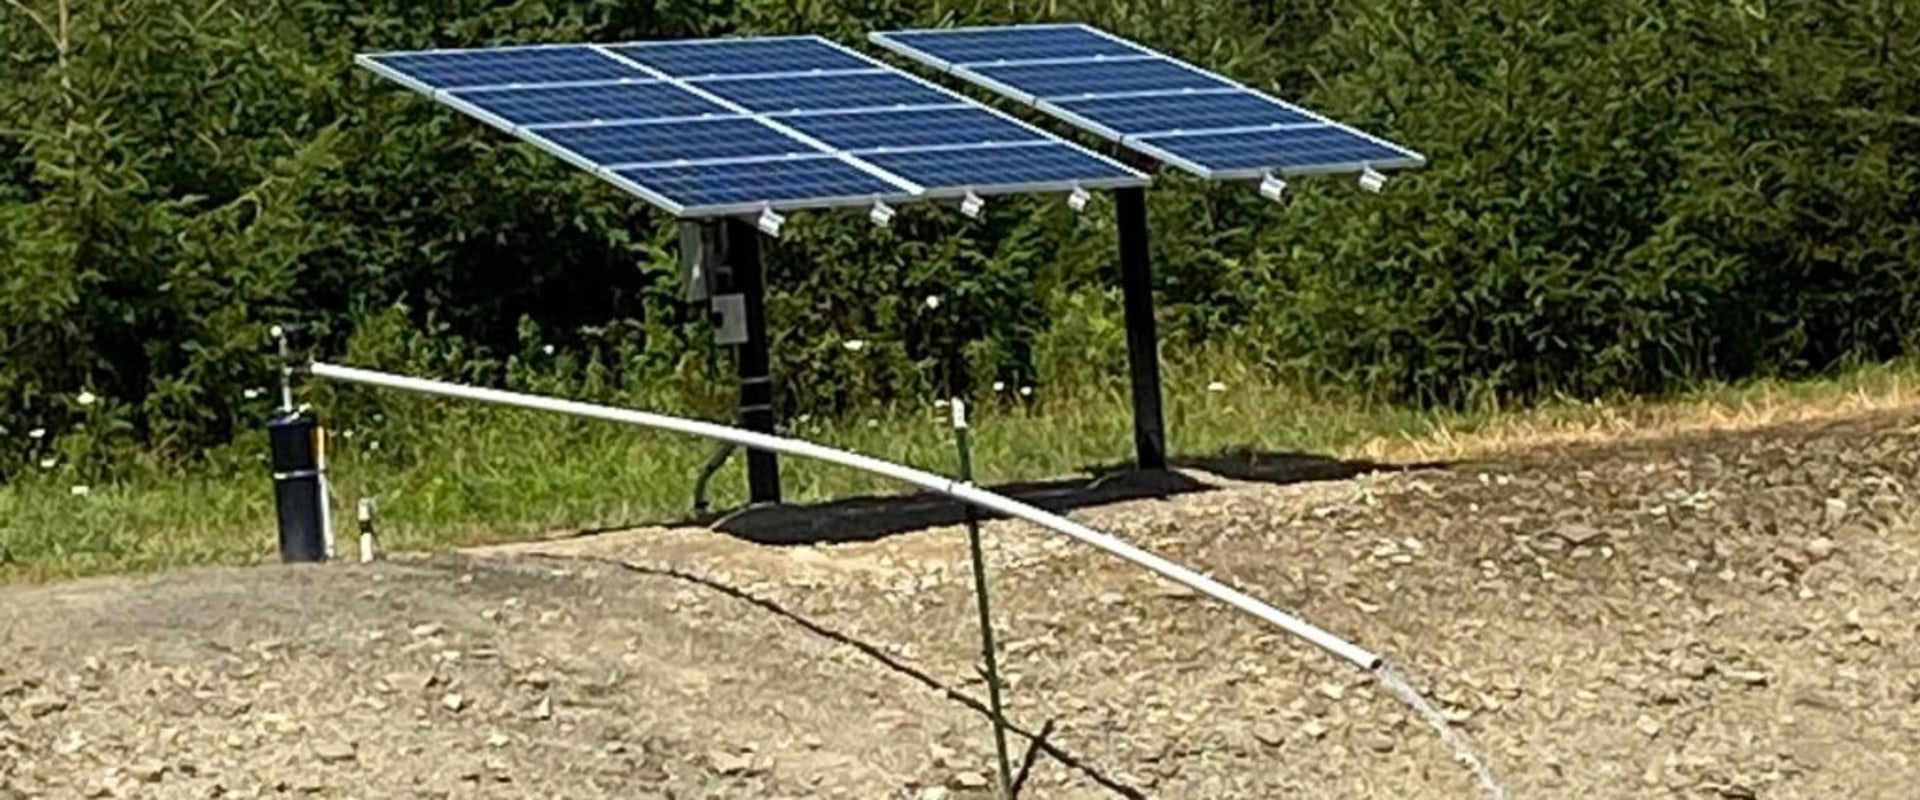 What Can a 400W Solar Panel Power?